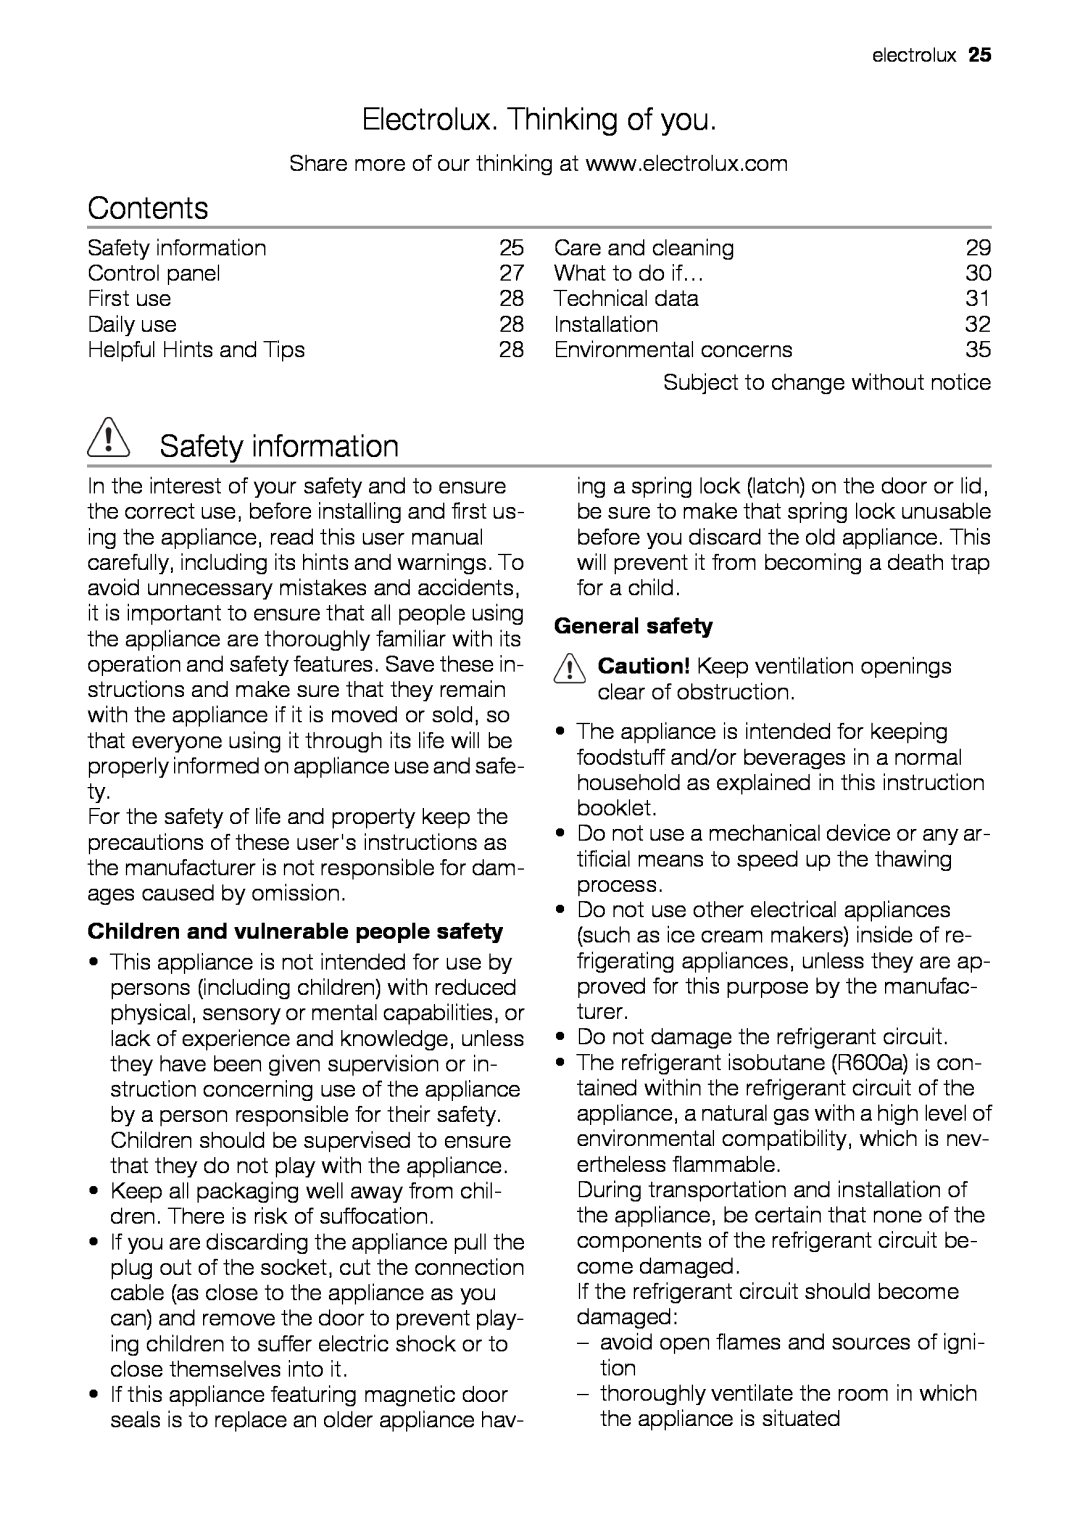 Electrolux EUN12510 user manual Contents, Safety information, Children and vulnerable people safety, General safety 